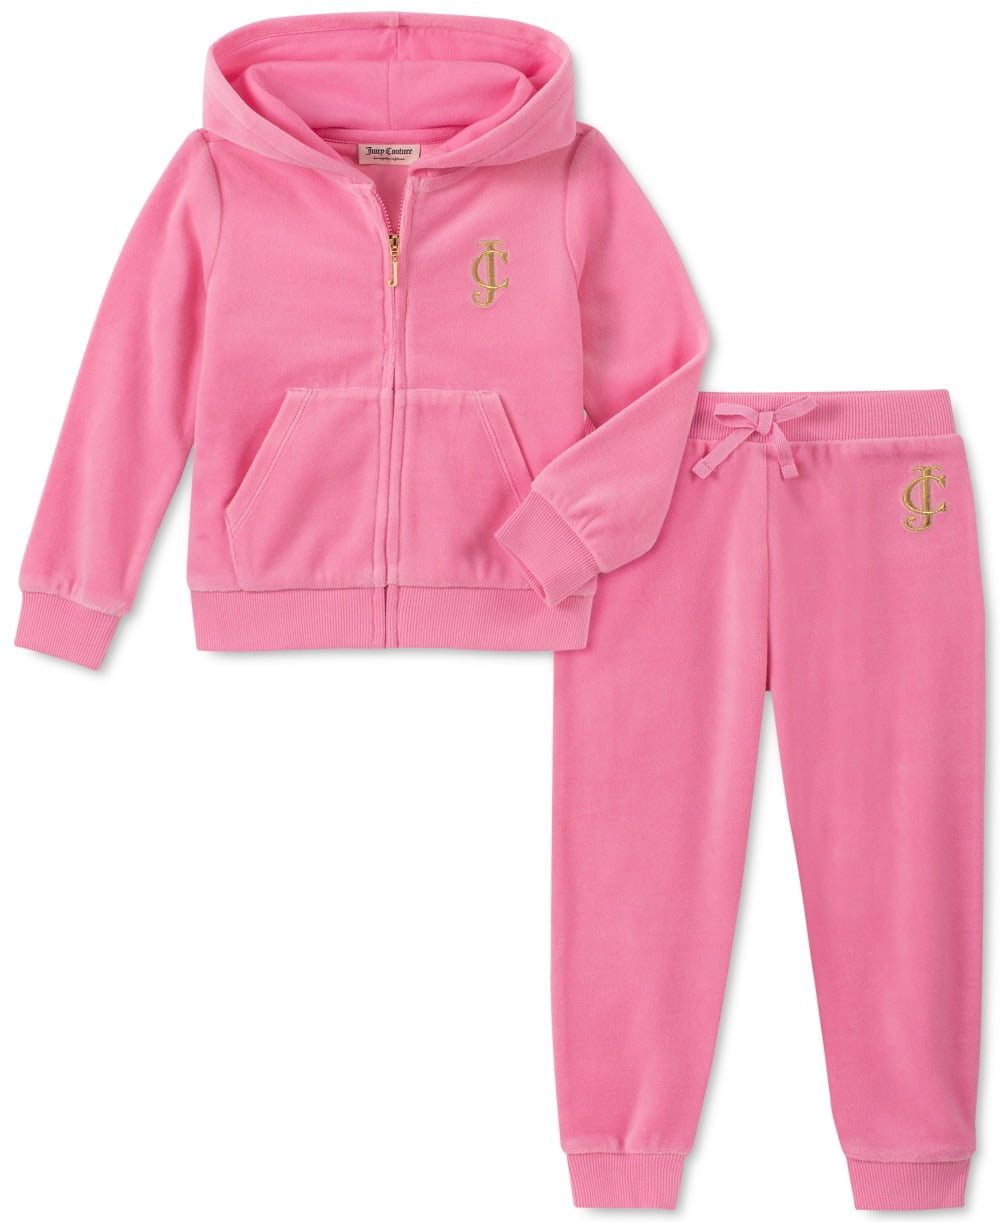 Juicy Couture girls 2 Pieces Pants Set, Pink/Print, 4T : Buy Online at Best  Price in KSA - Souq is now : Fashion